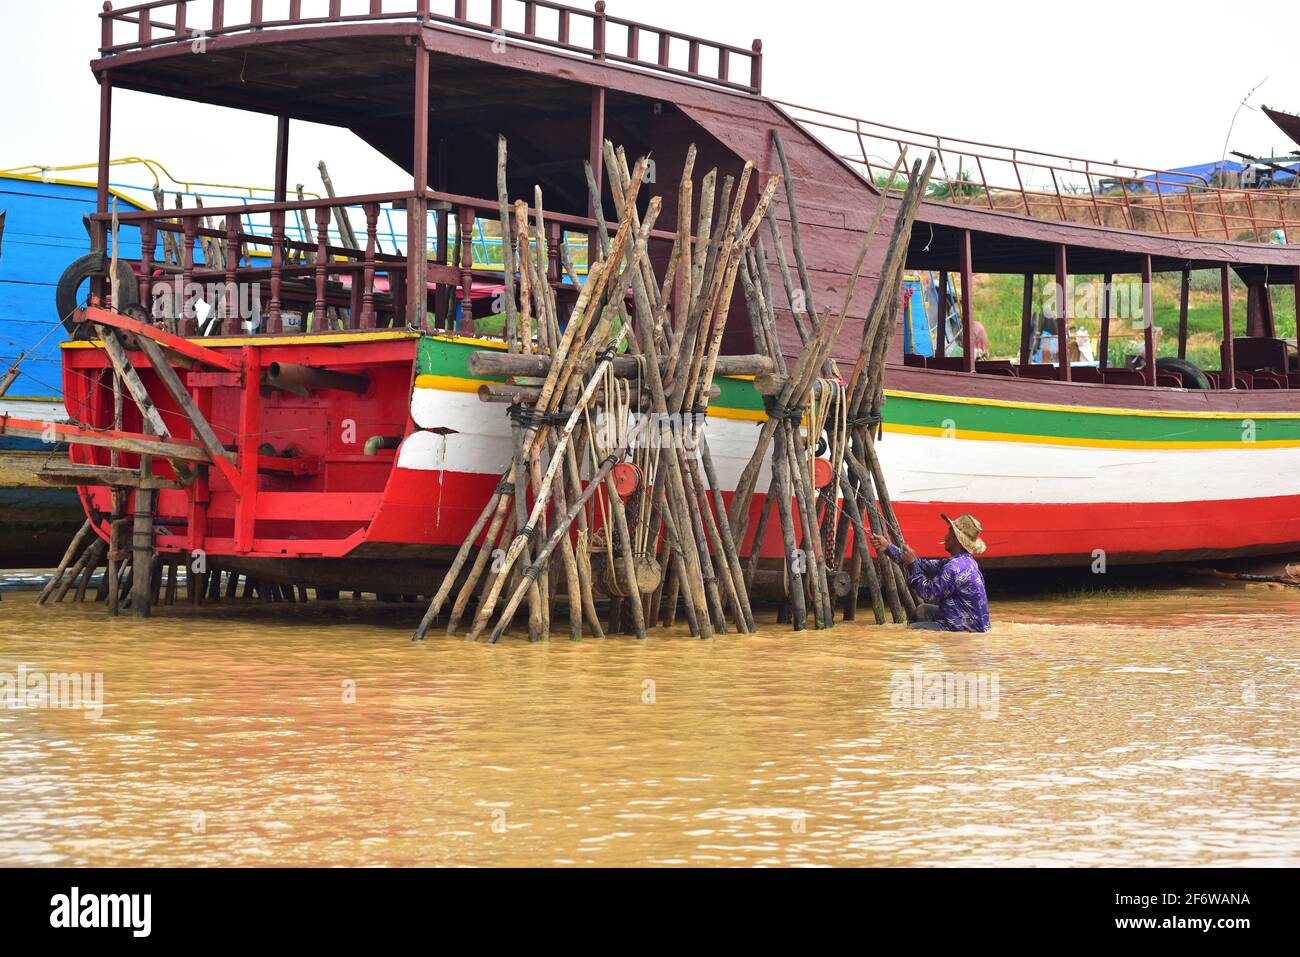 Moored boat on a river bank. Tonle Seap river, Siem Reap, Cambodia. Stock Photo